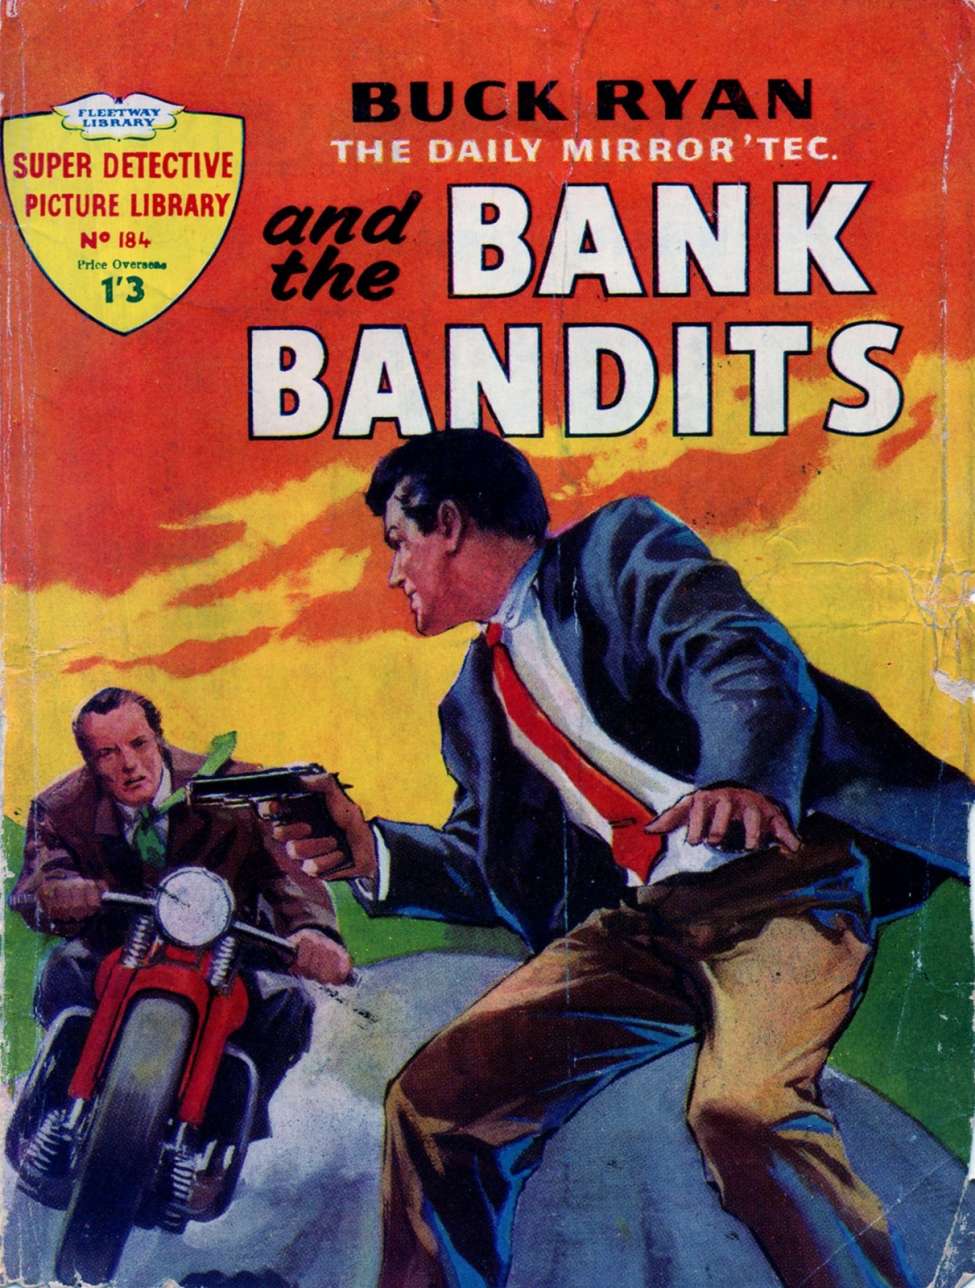 Book Cover For Super Detective Library 184 - Buck Ryan And The Bank Bandits